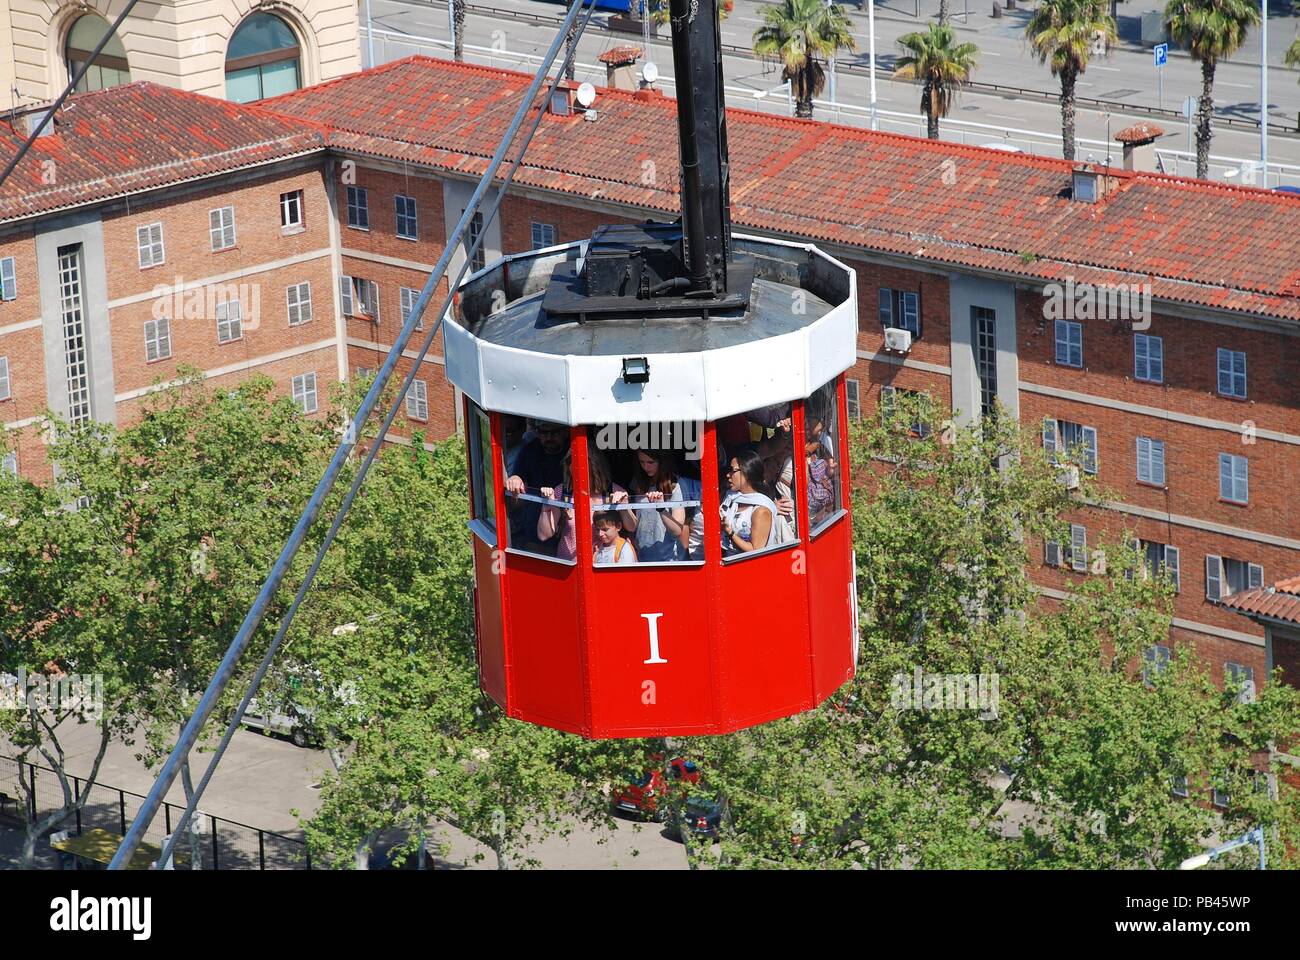 A vintage red cable car on the Transbordador Aeri del Port approaches Montjuic hill in Barcelona, Spain on April 19, 2018. Stock Photo